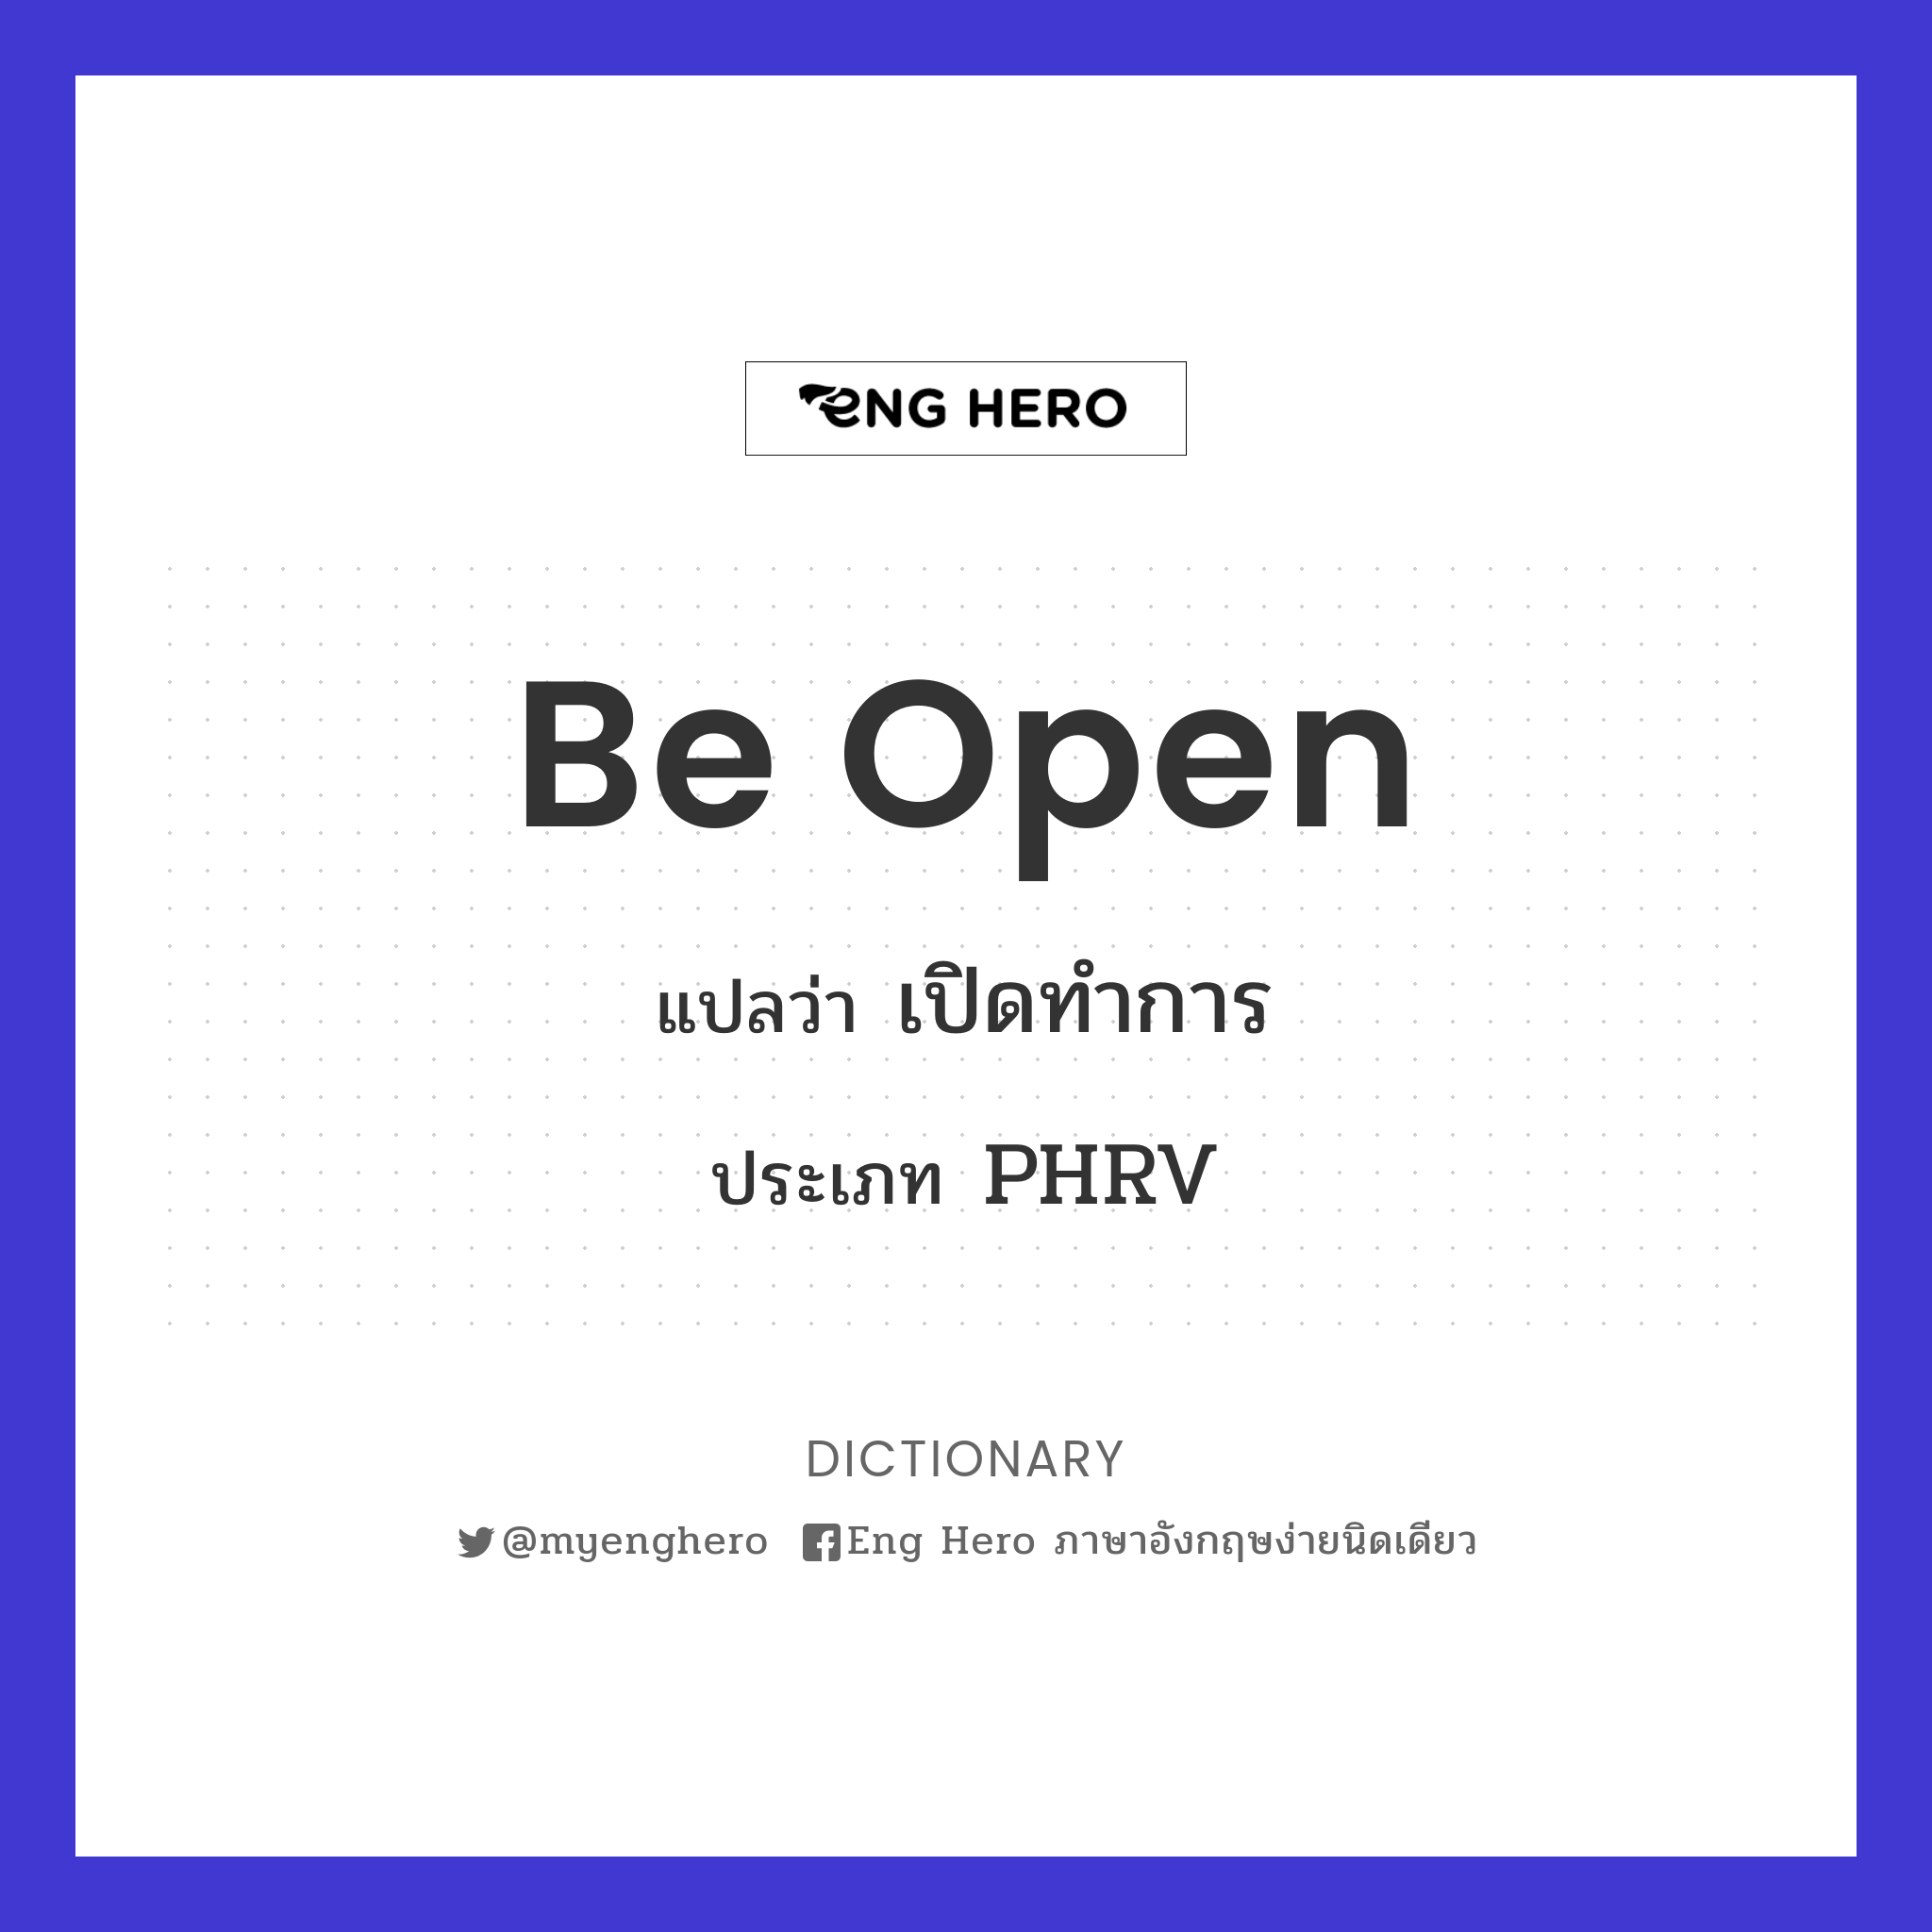 be open